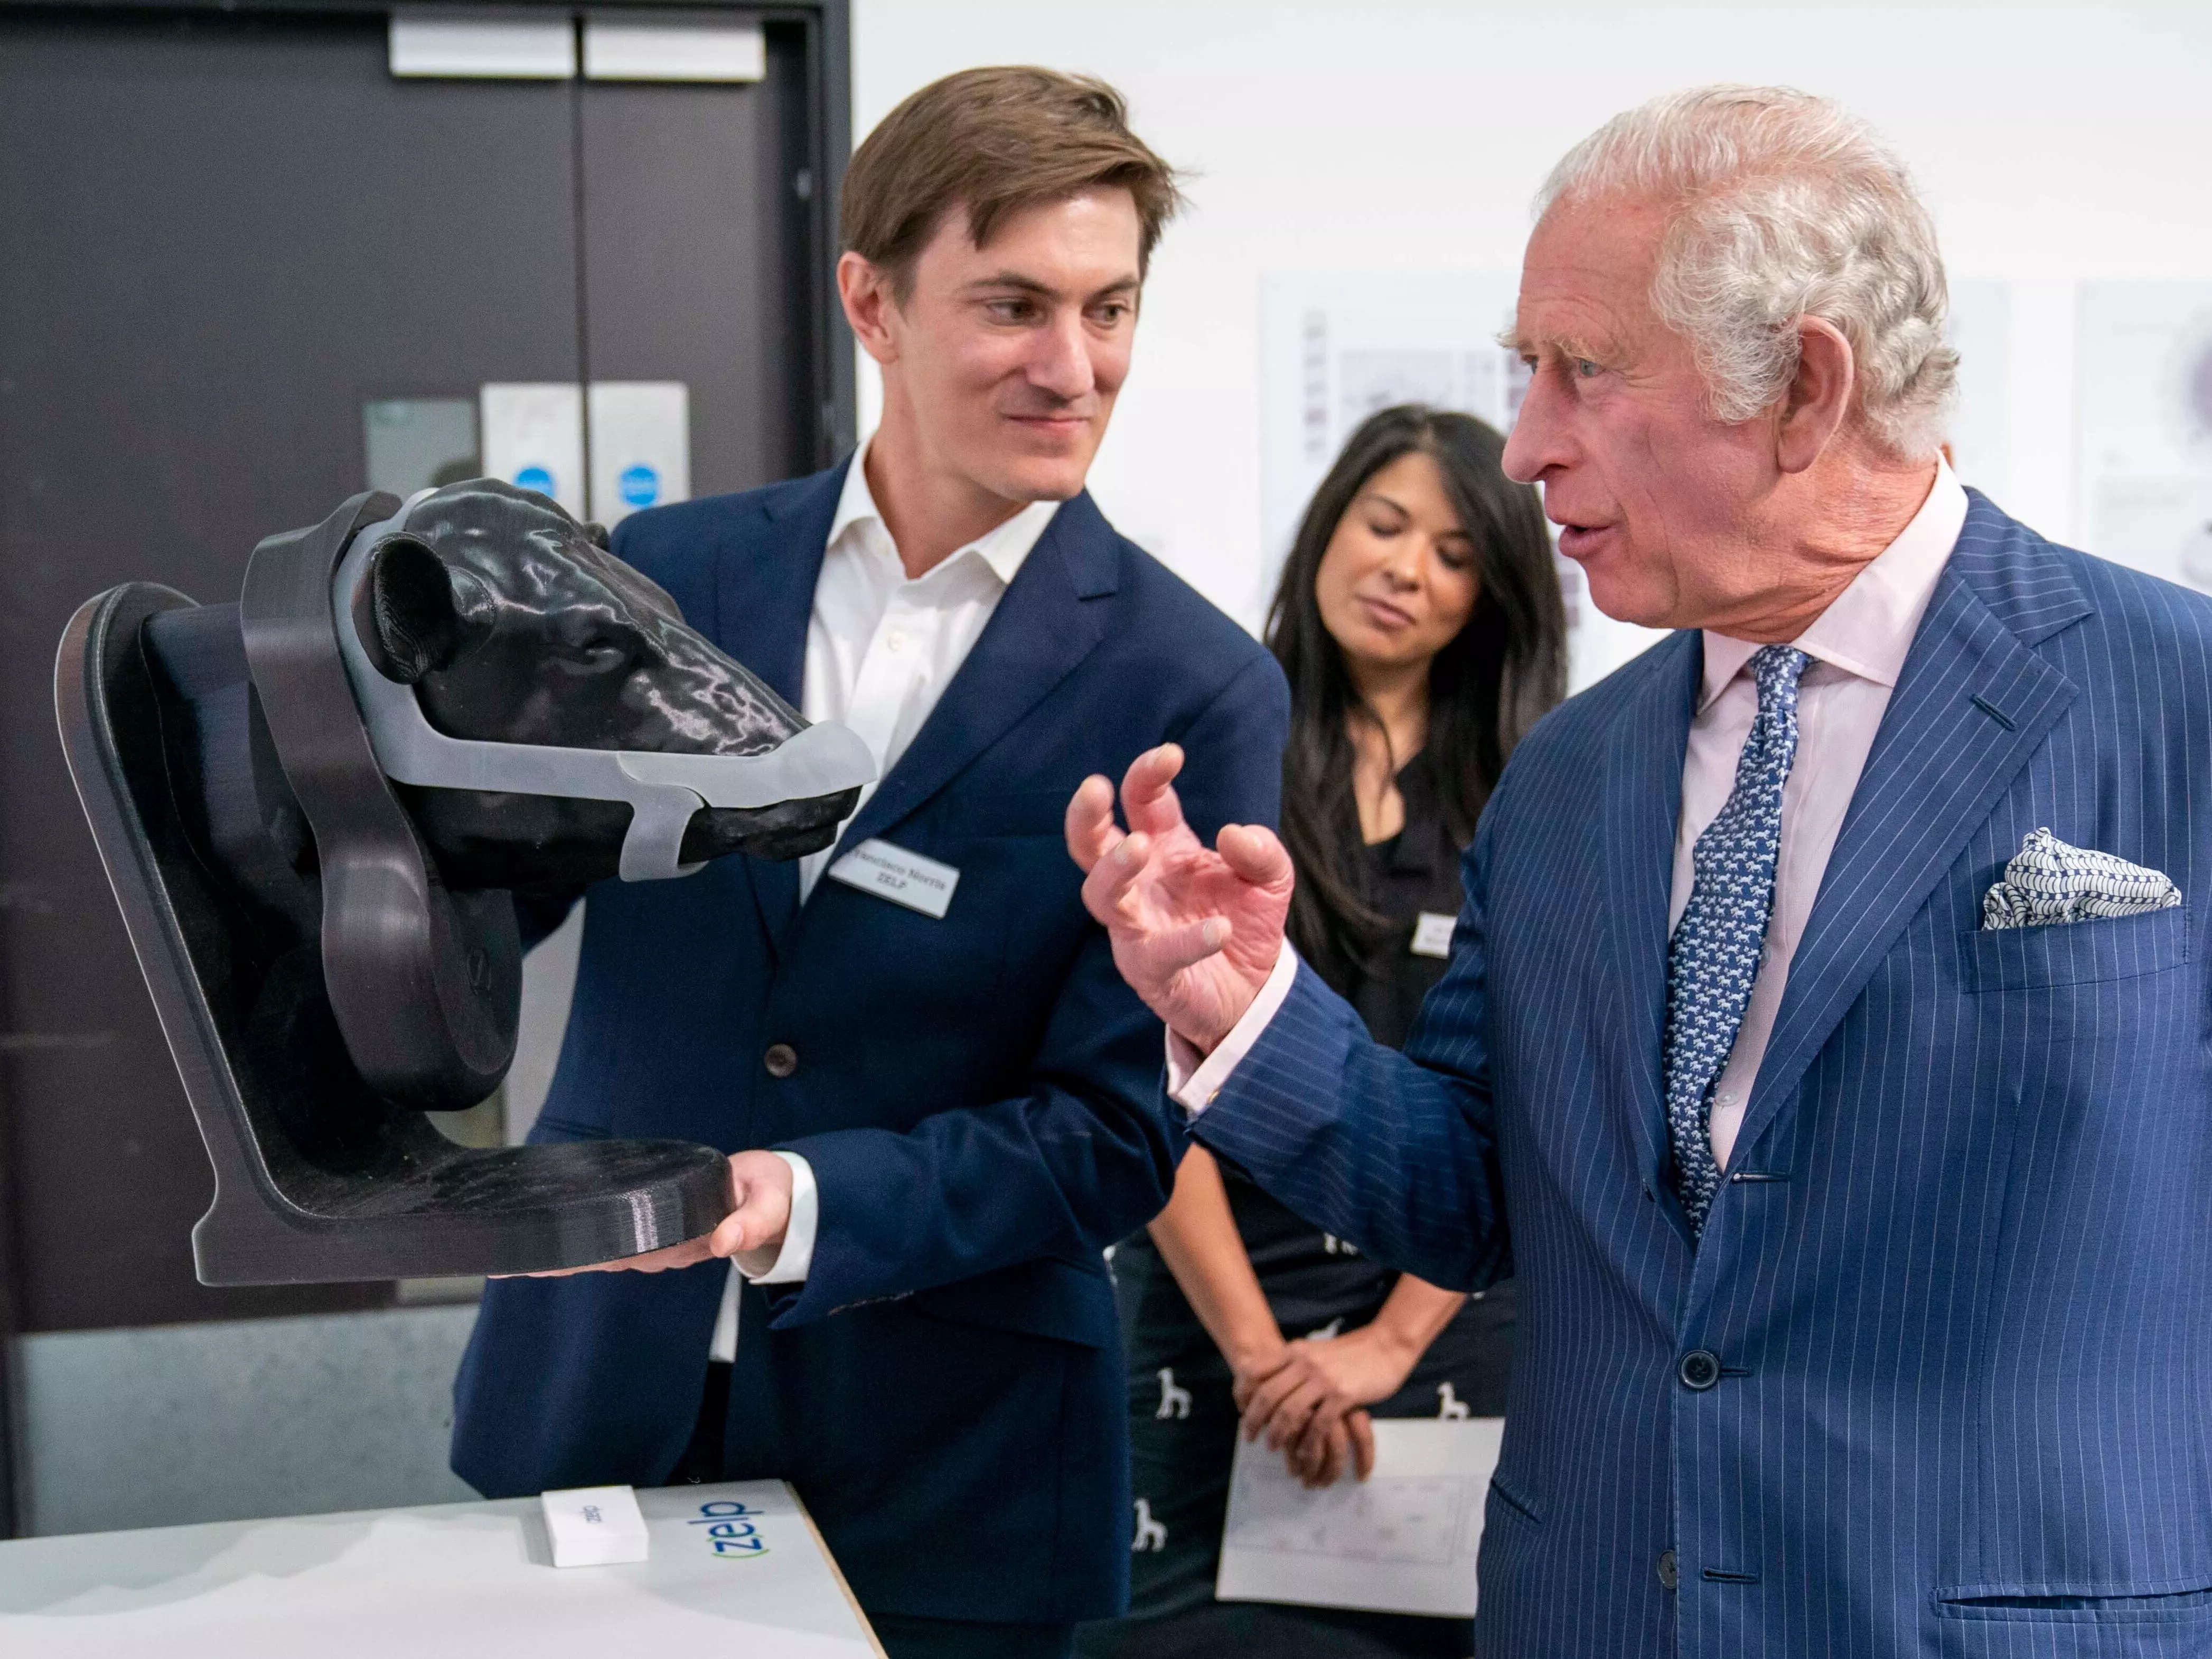 Burp-catching mask for gassy cows, designed to reduce methane emissions and slow down climate change, wins prestigious Prince Charles prize | Business Insider India